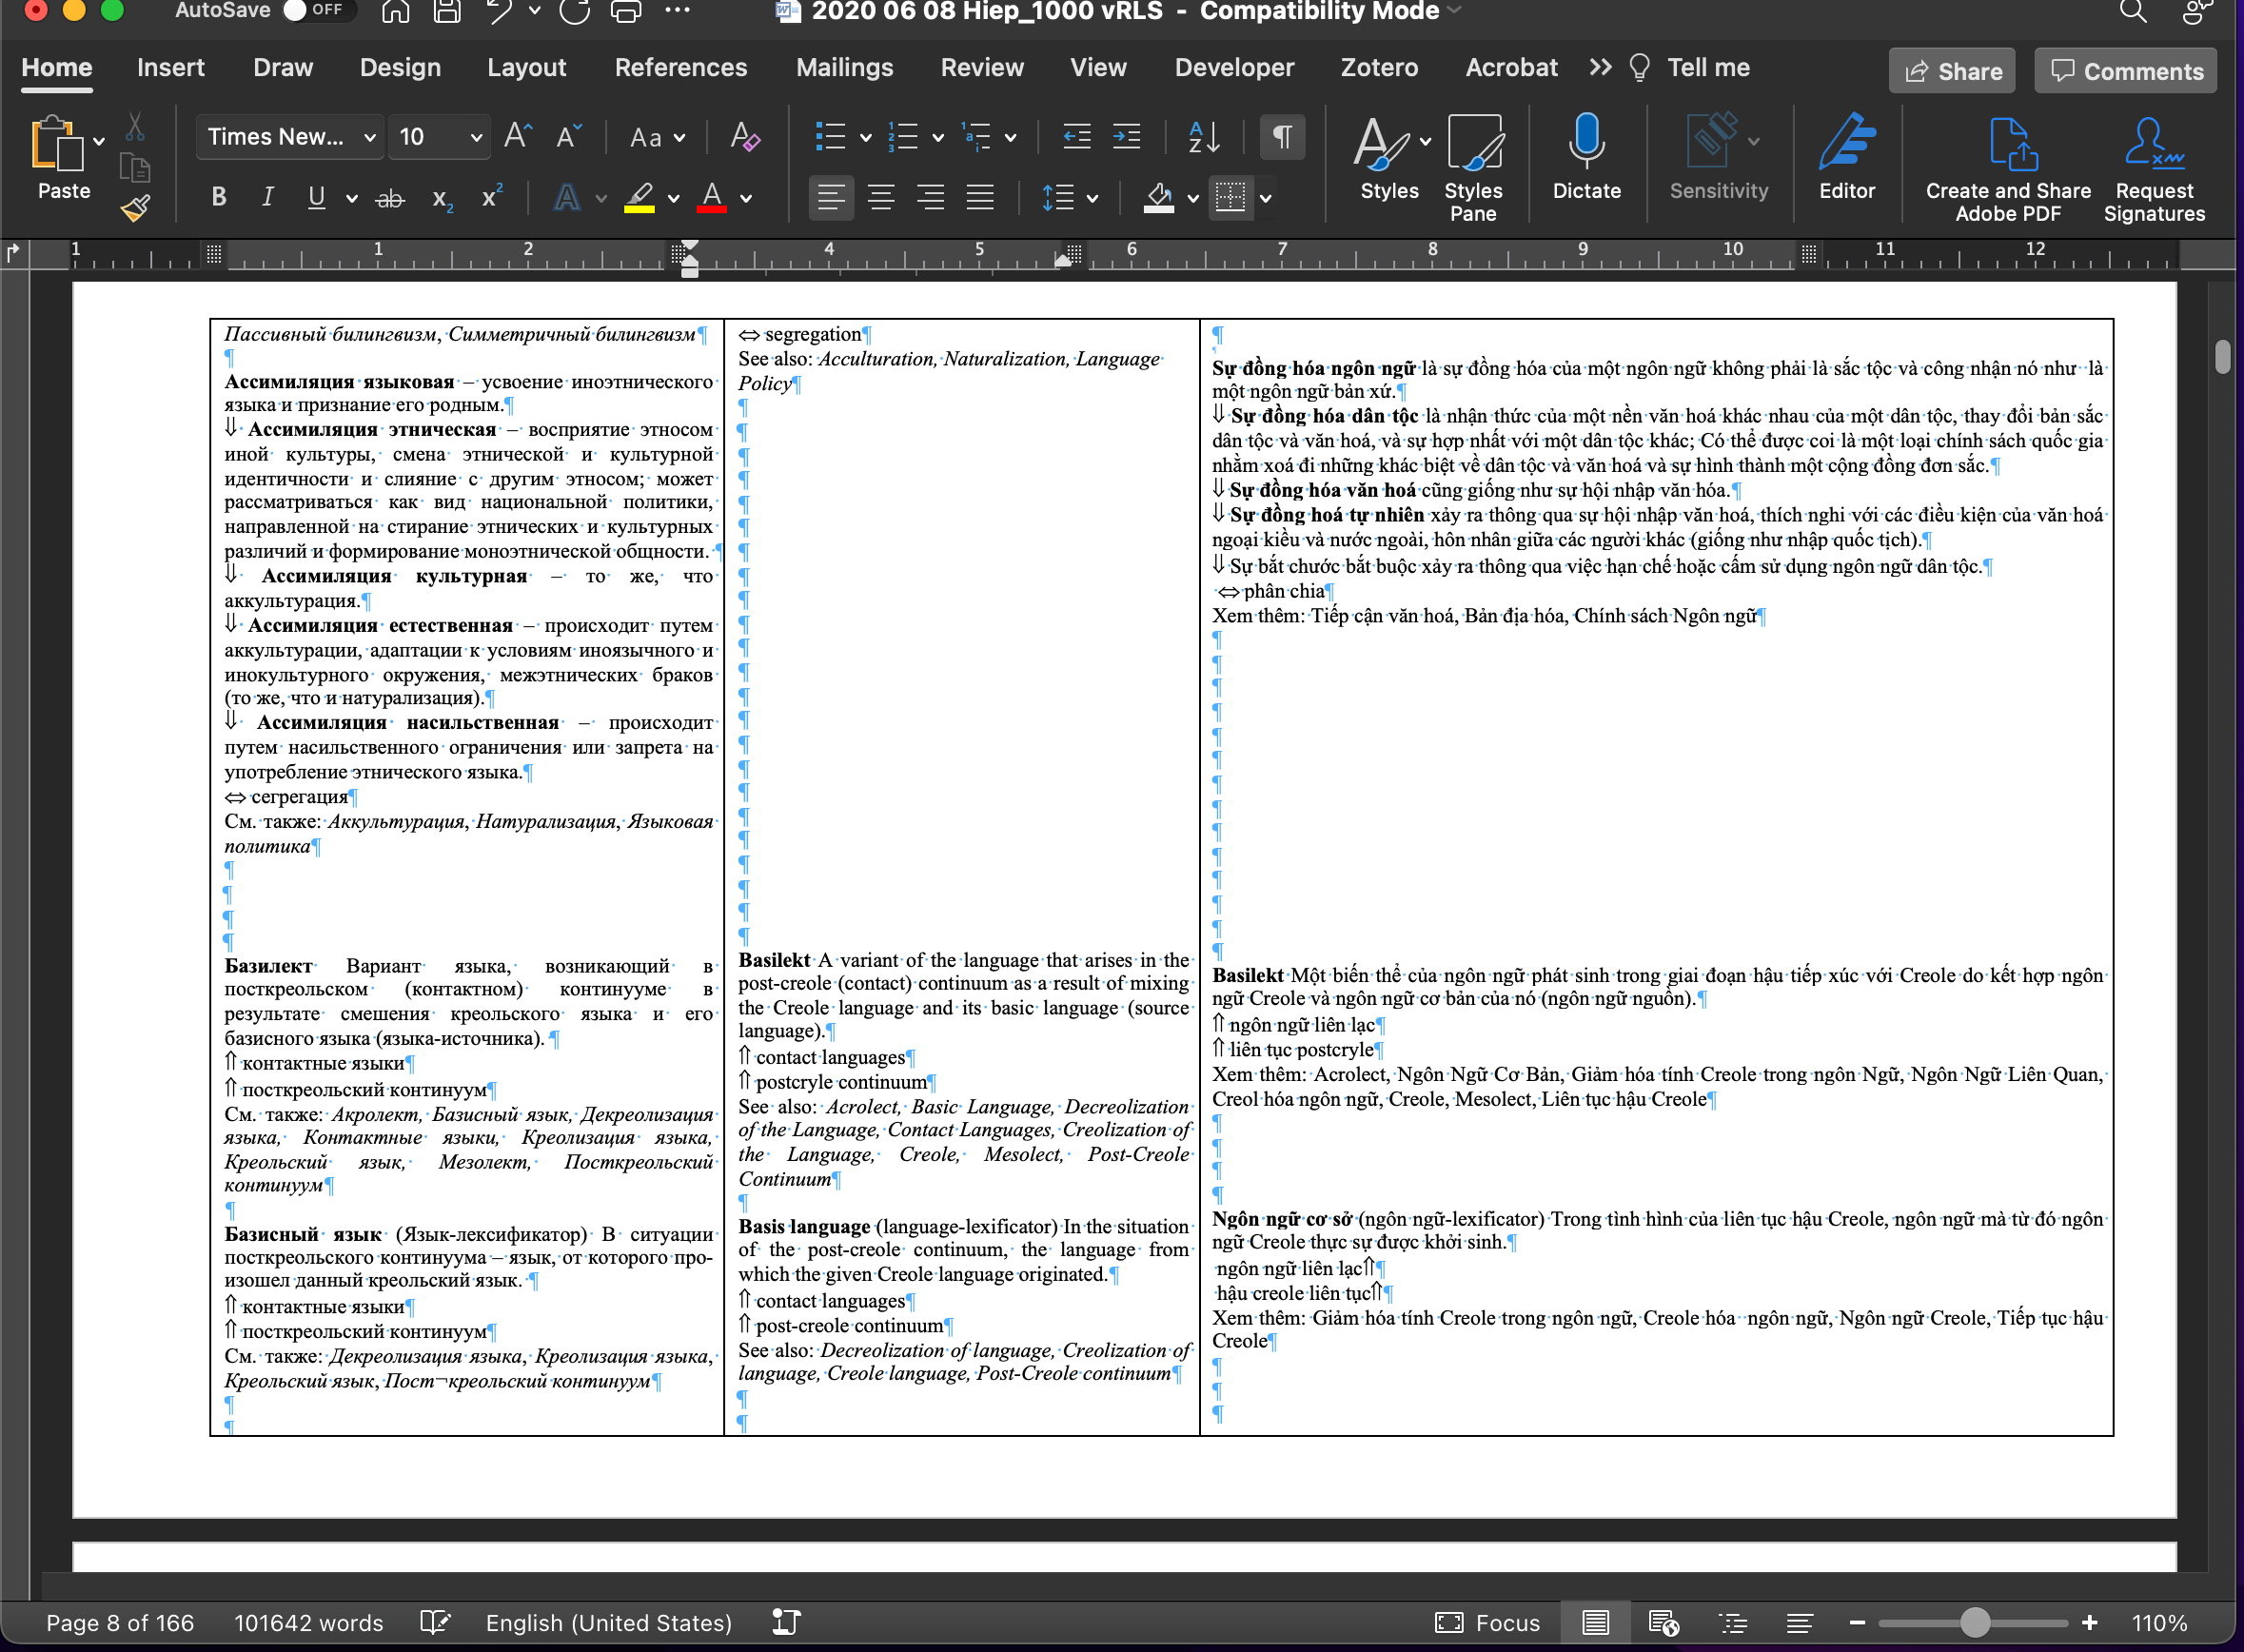 Screenshot of MS Word showing Glossary